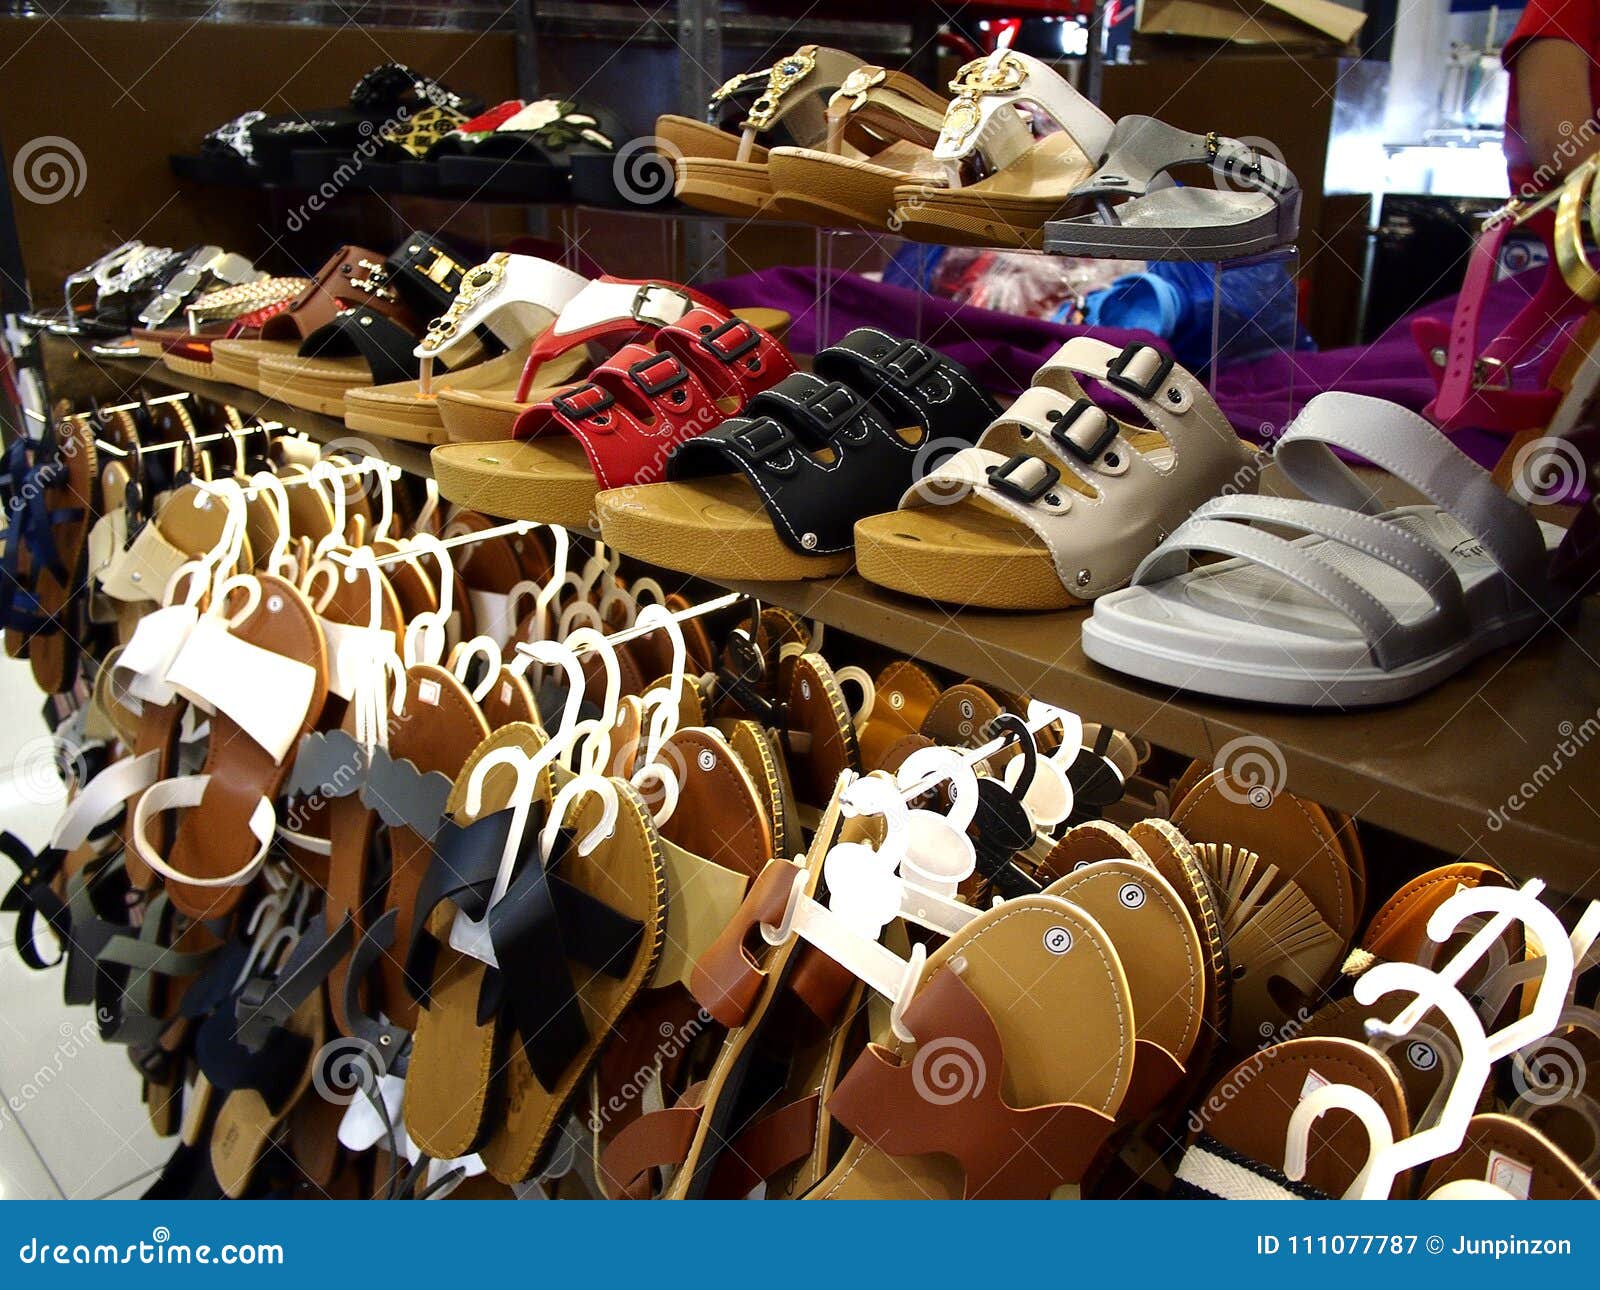 Sandals and Slippers on Display Stock Image - Image of accessories ...